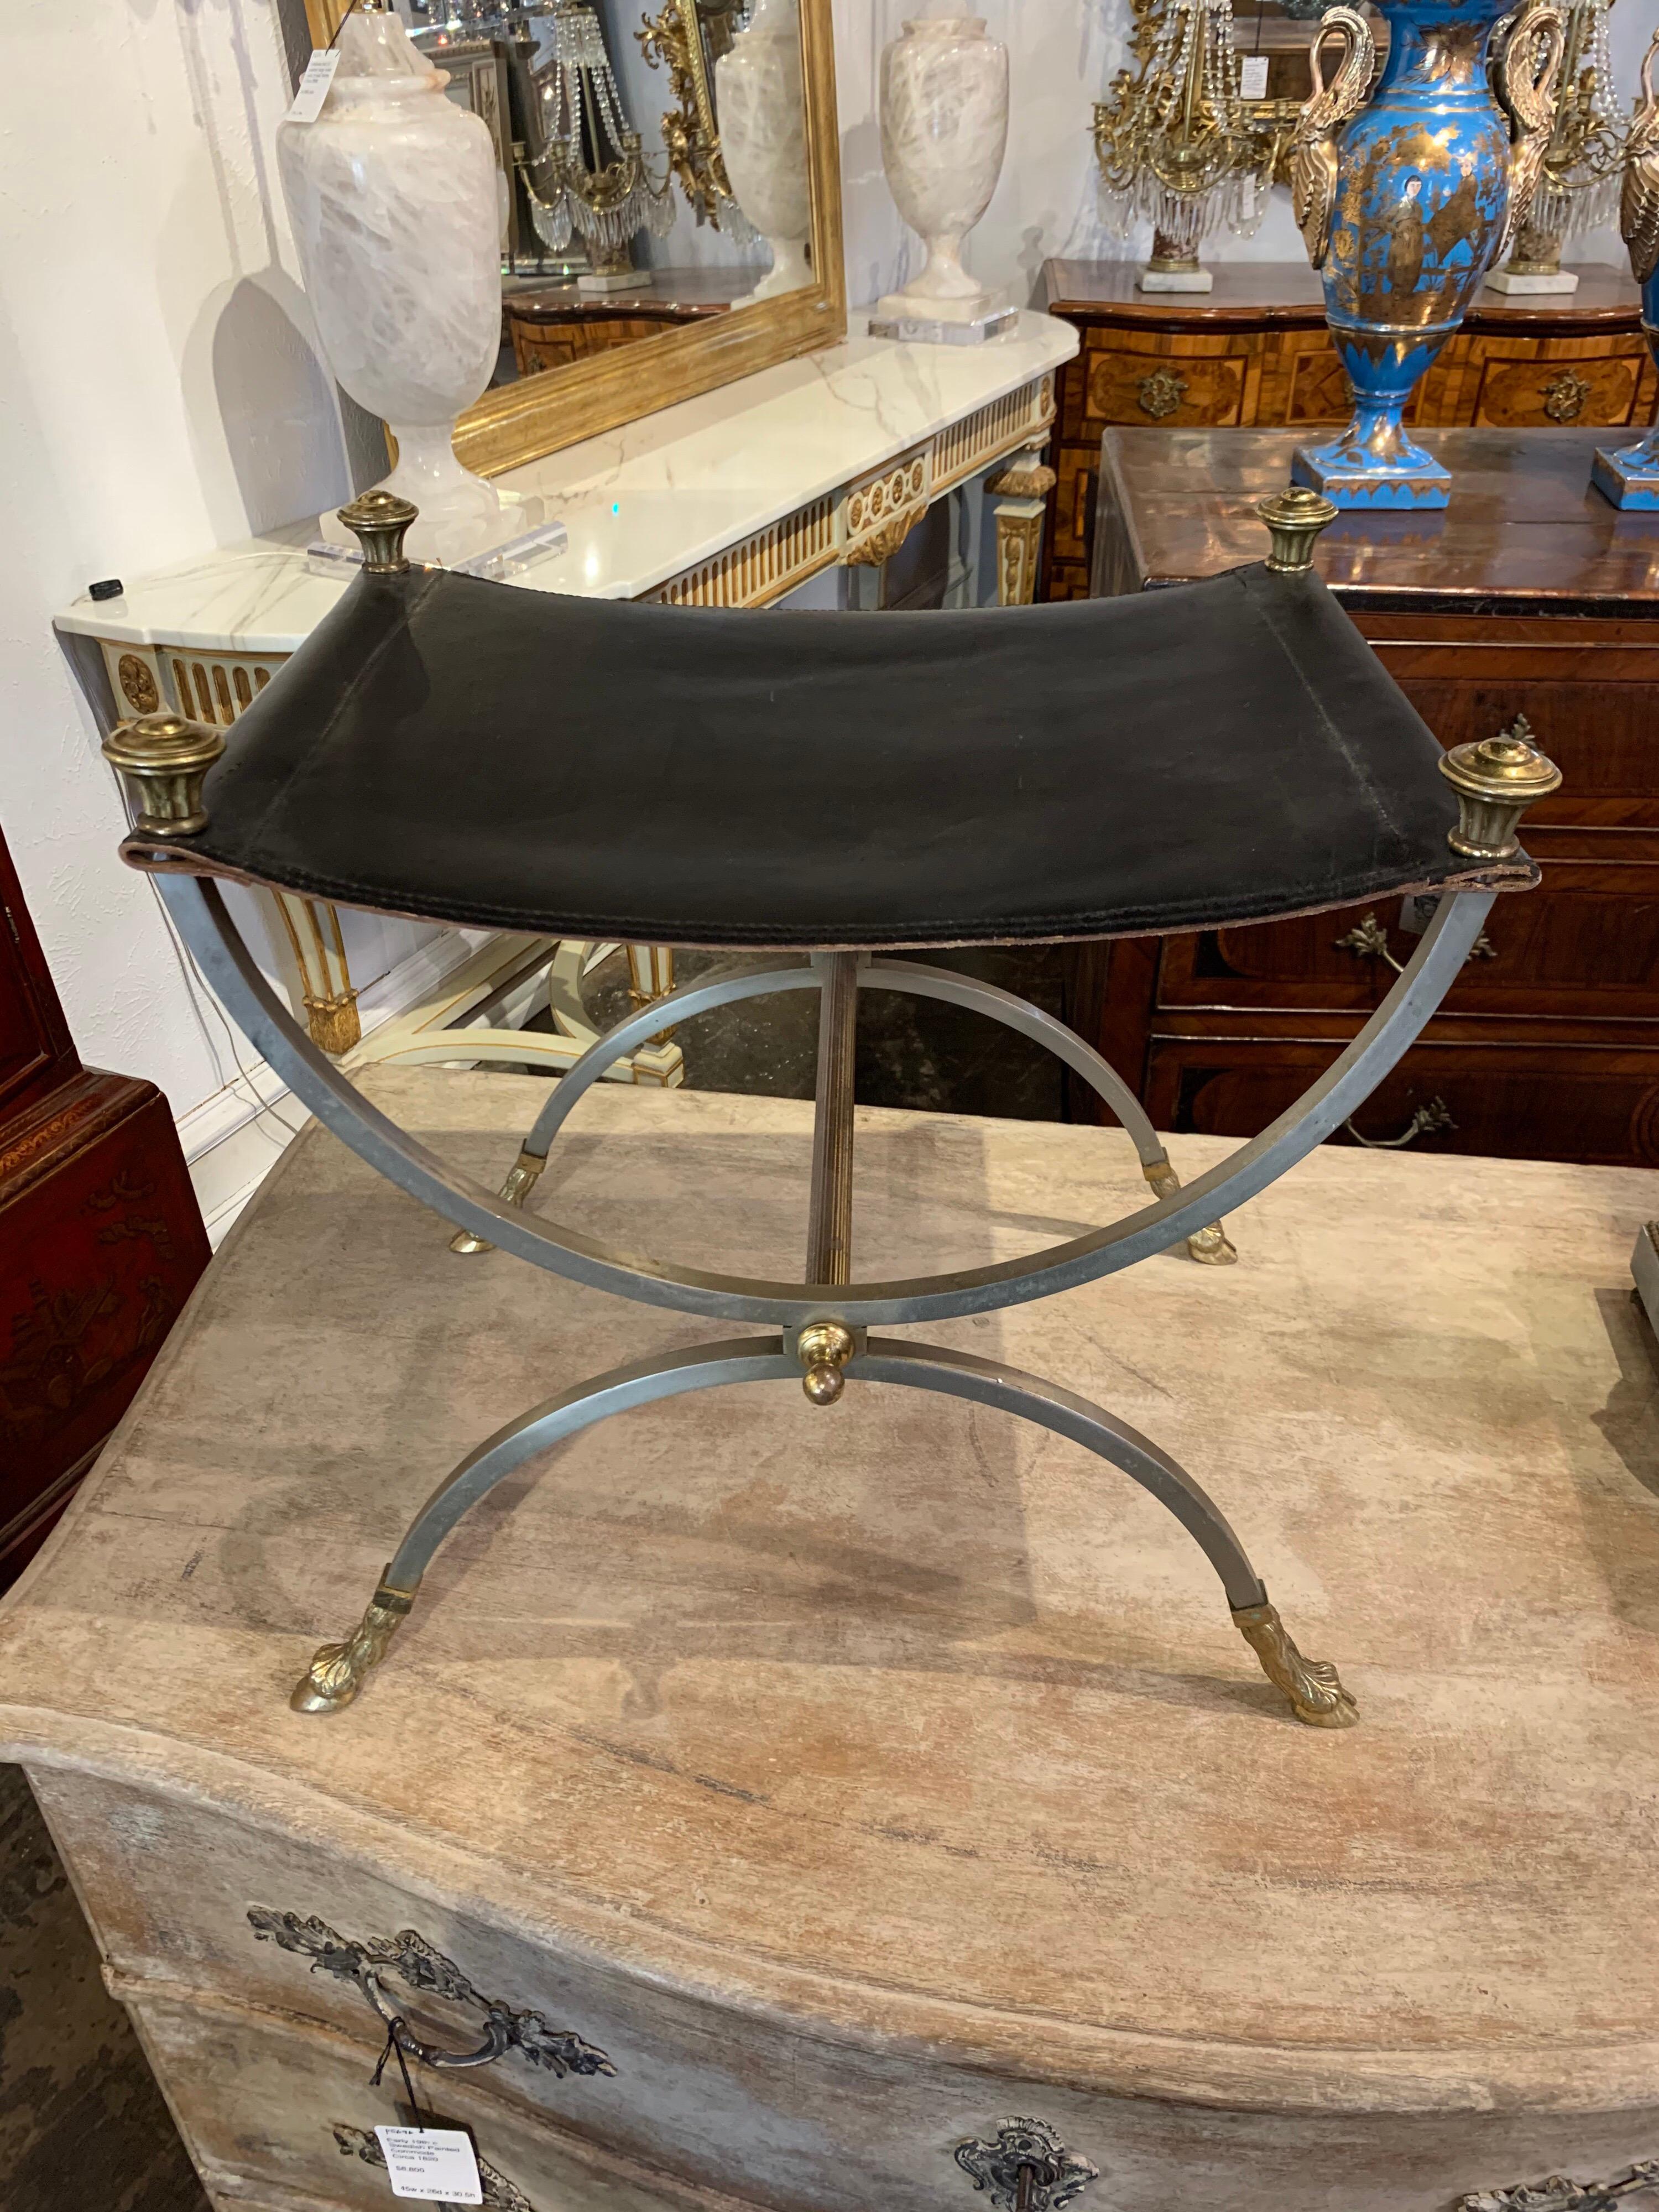 Handsome midcentury French Jansen style brass and leather stool. Nice details on the feet and on the top of the piece. A lovely decorative accent!